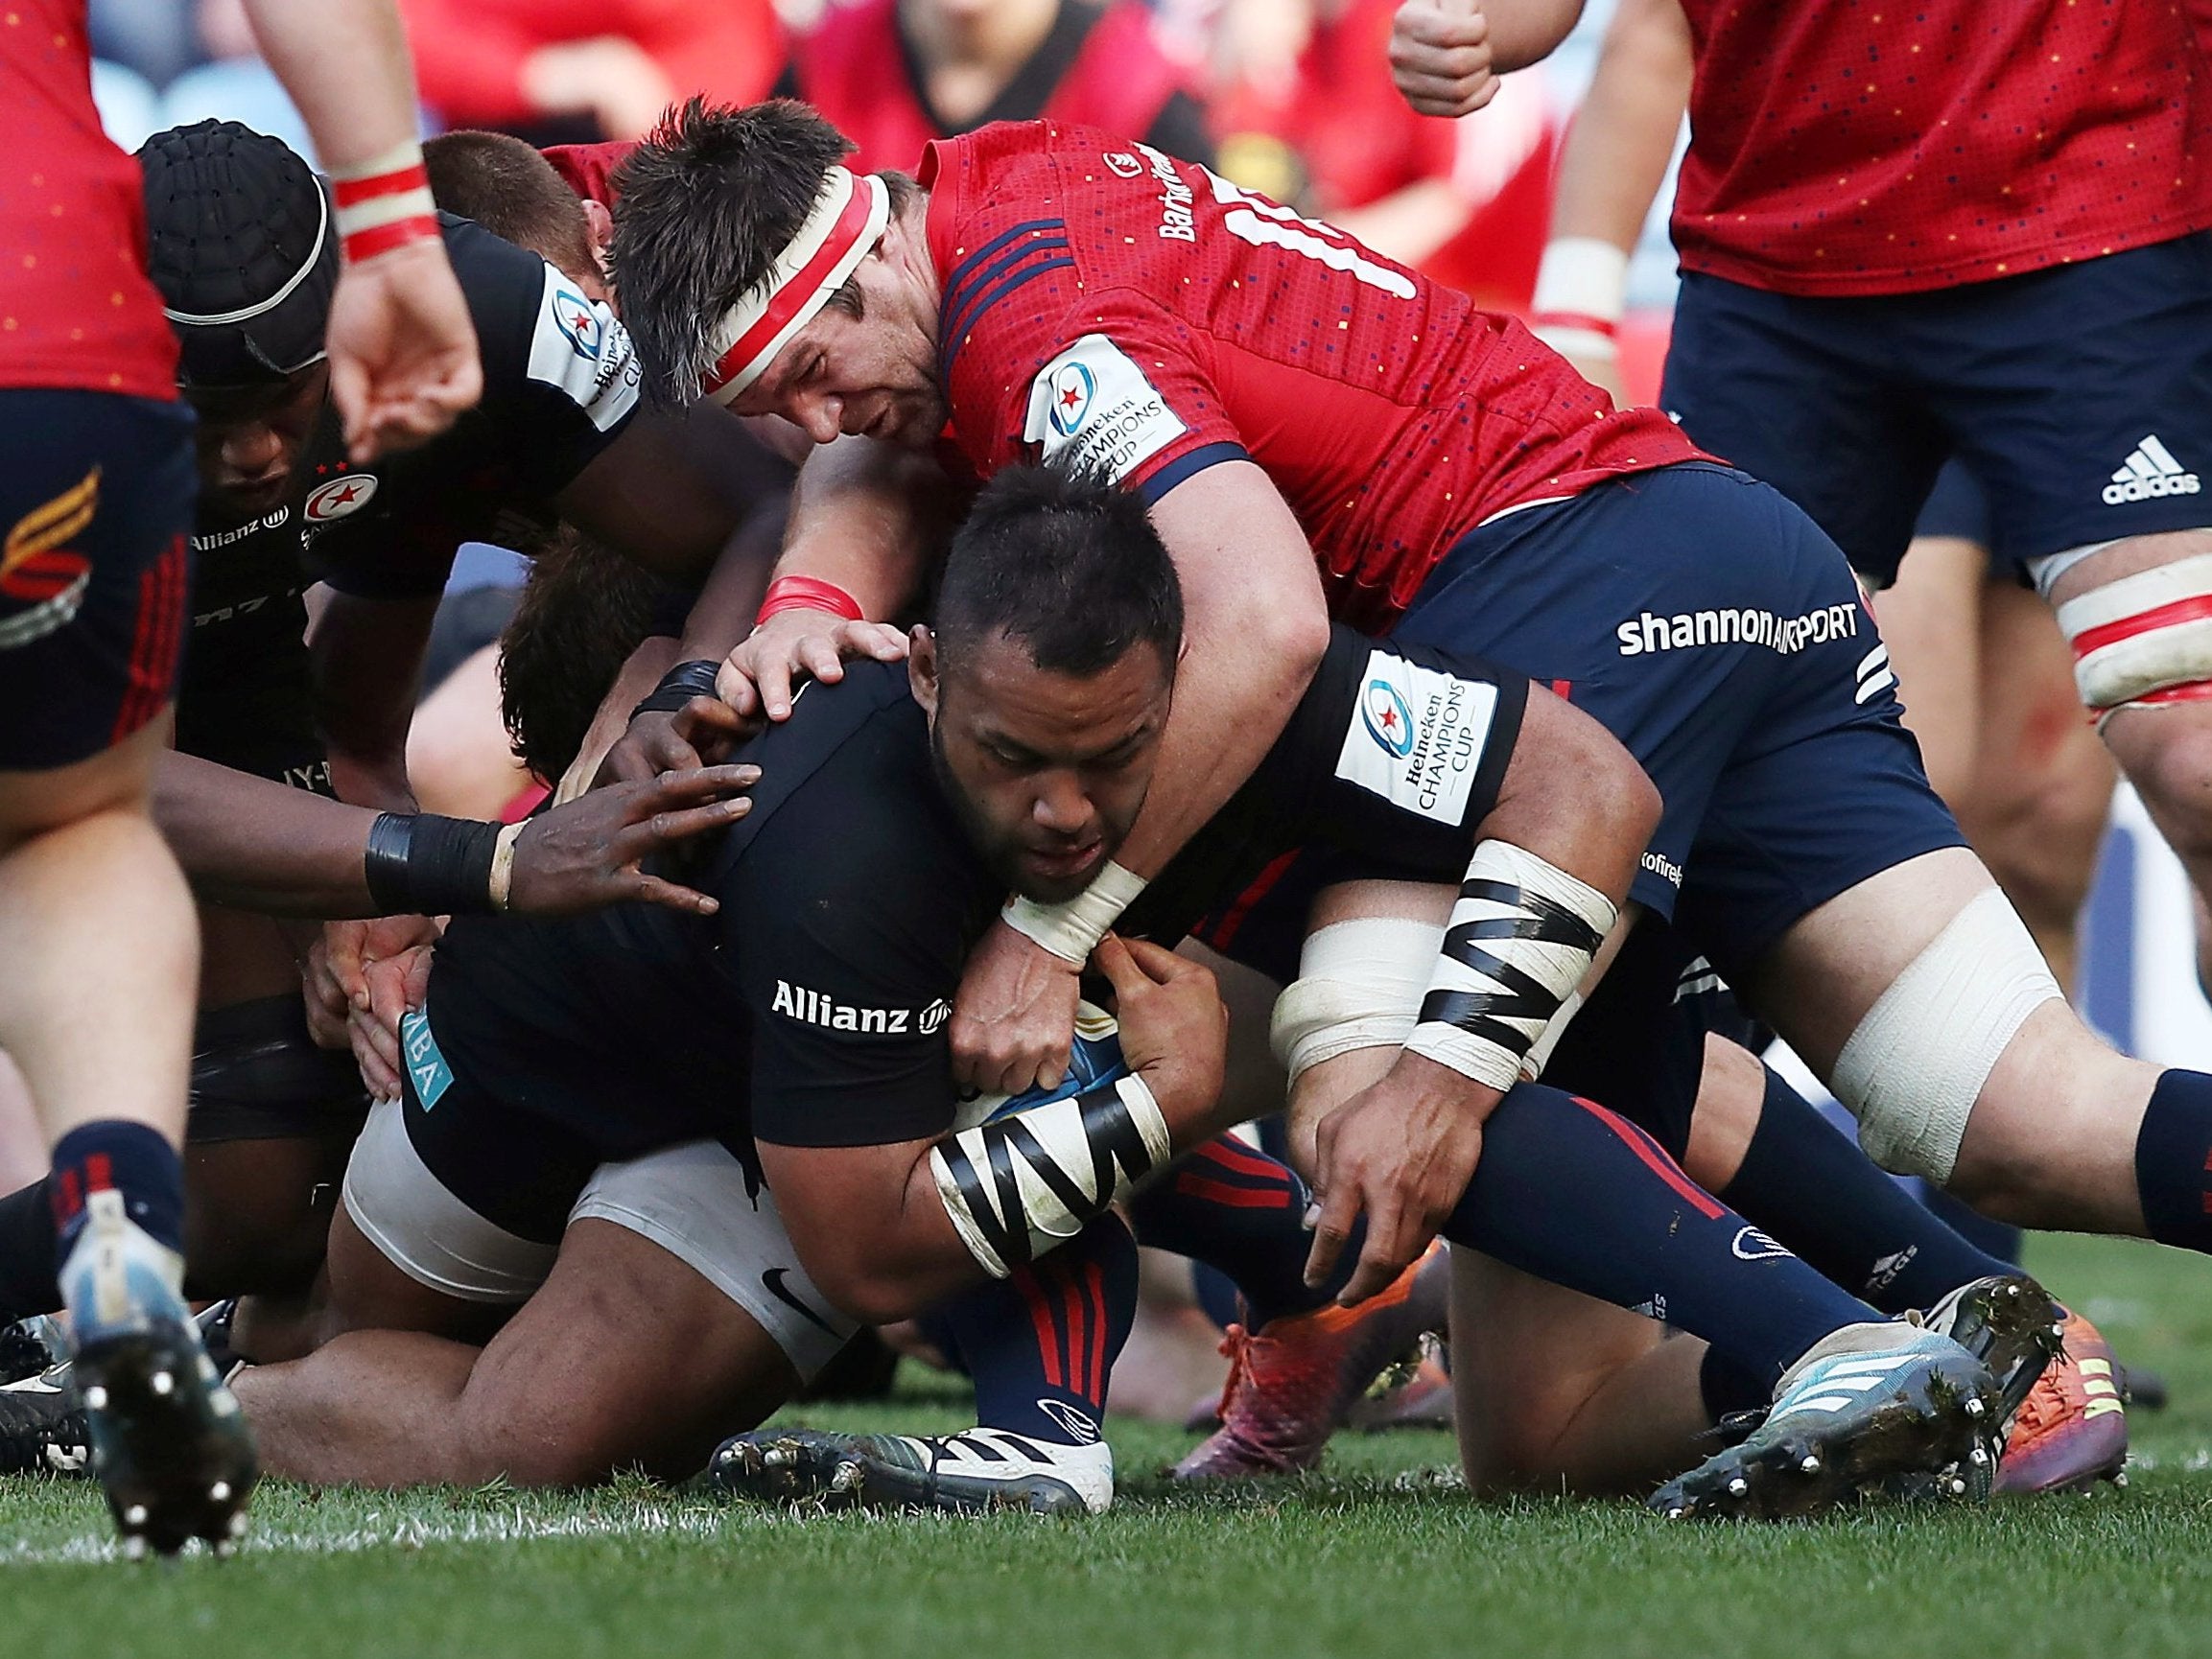 Vunipola scored Saracens’ second try to secure victory over Munster